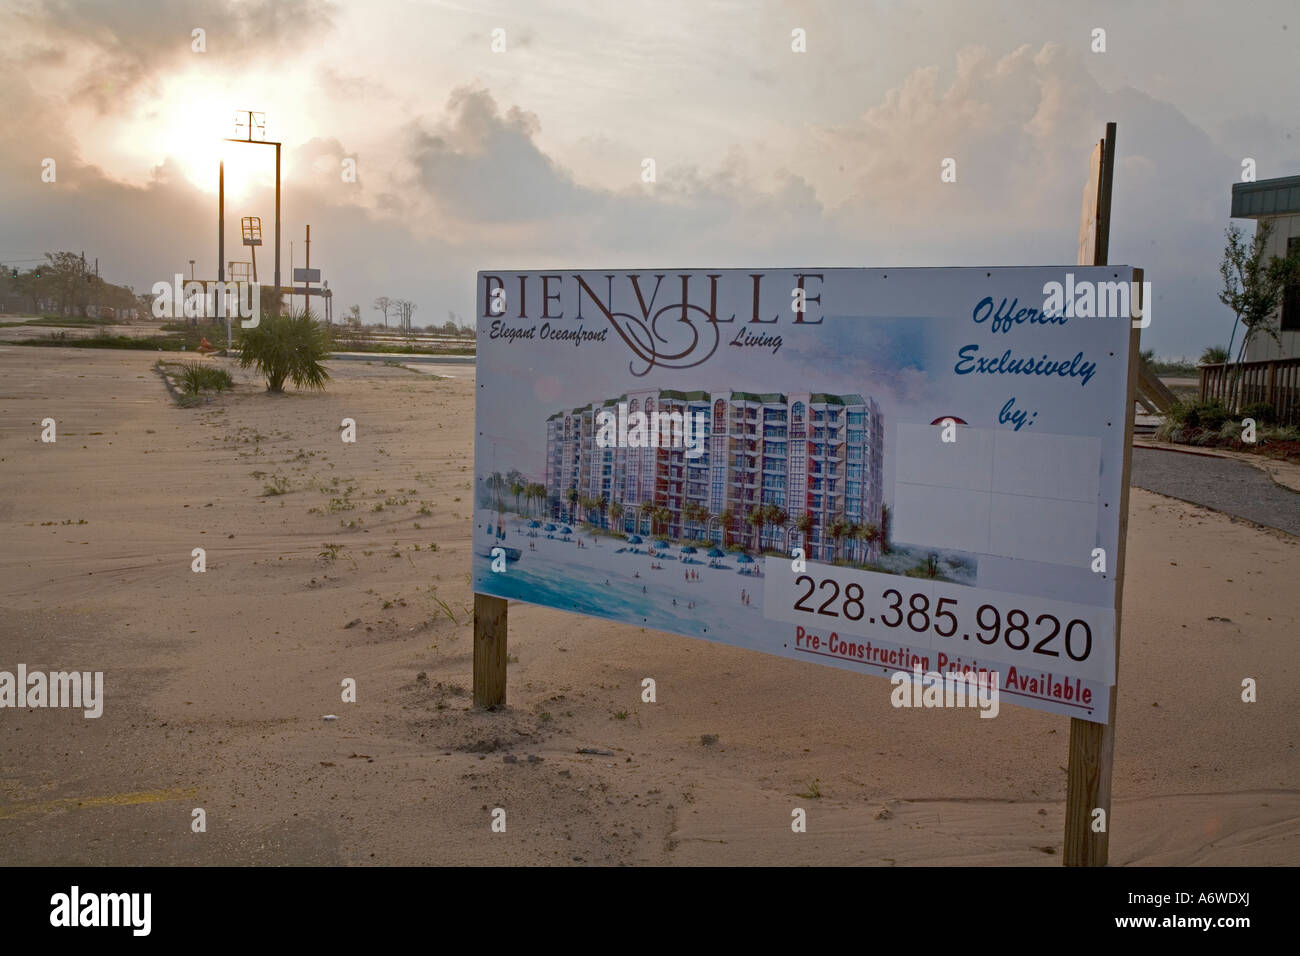 Luxury Condos Replace Small Homes and Businesses After Hurricane Katrina Stock Photo